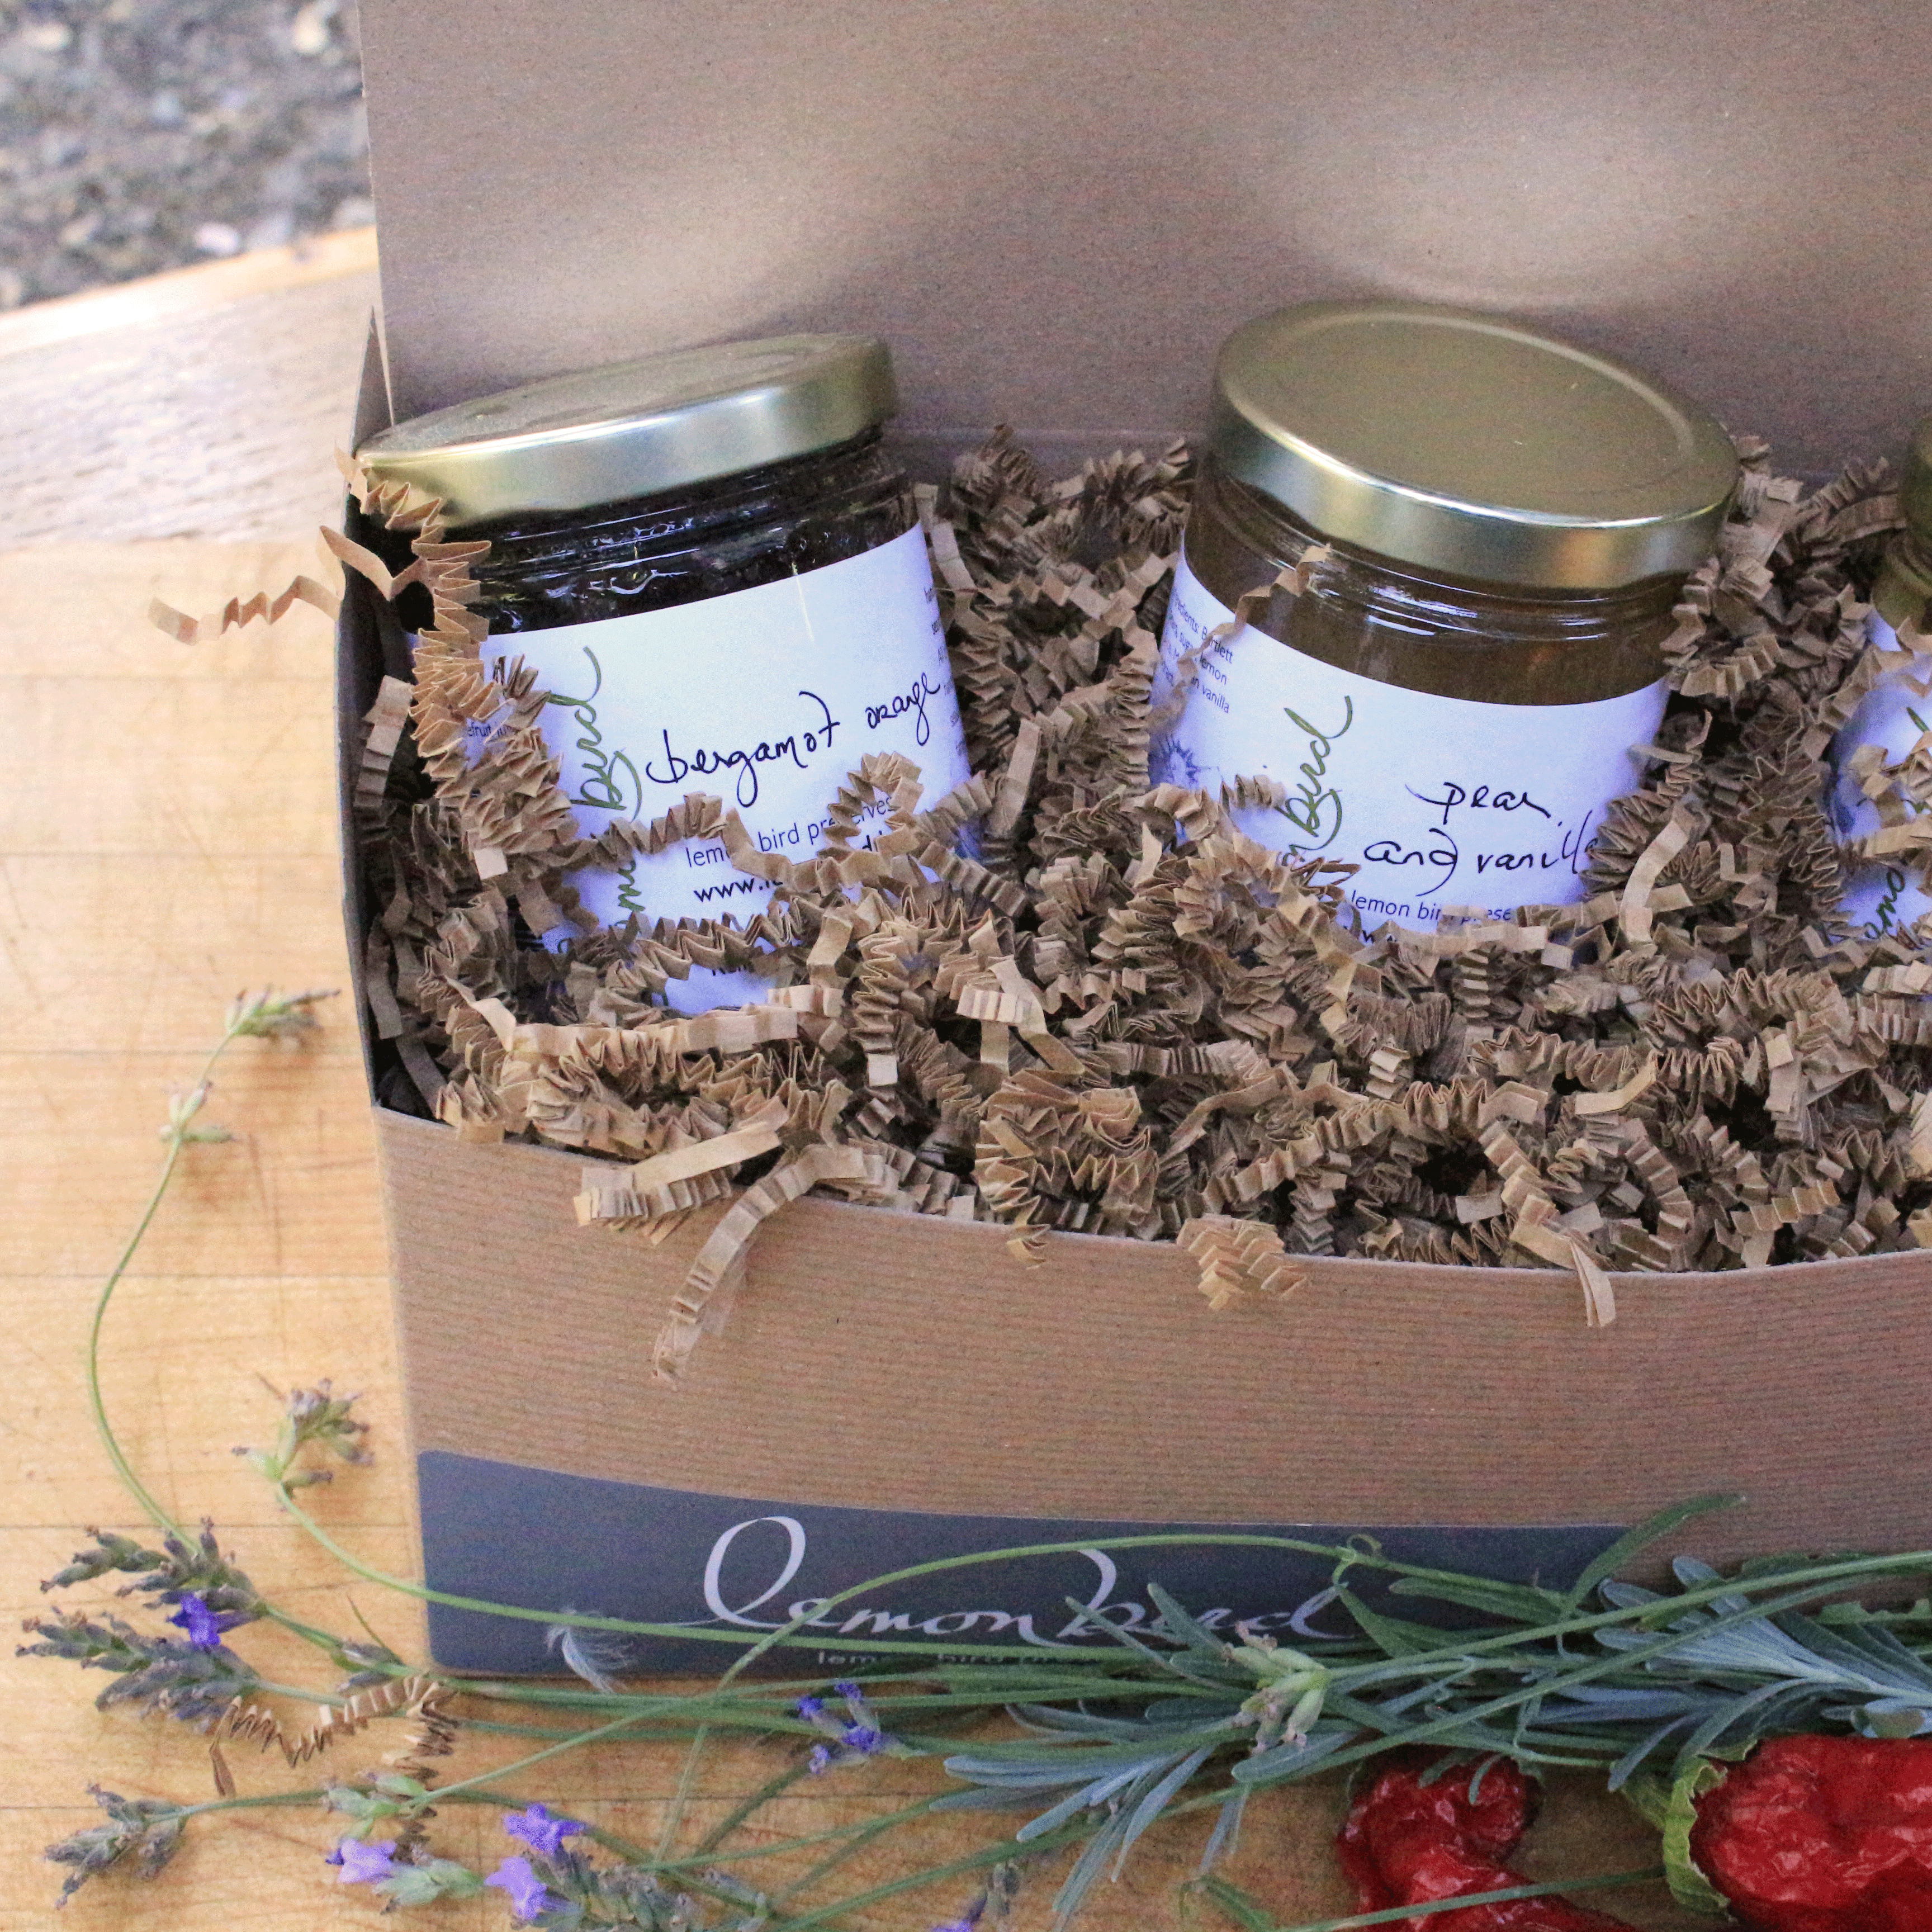 The "Create Your Own" Gift Box